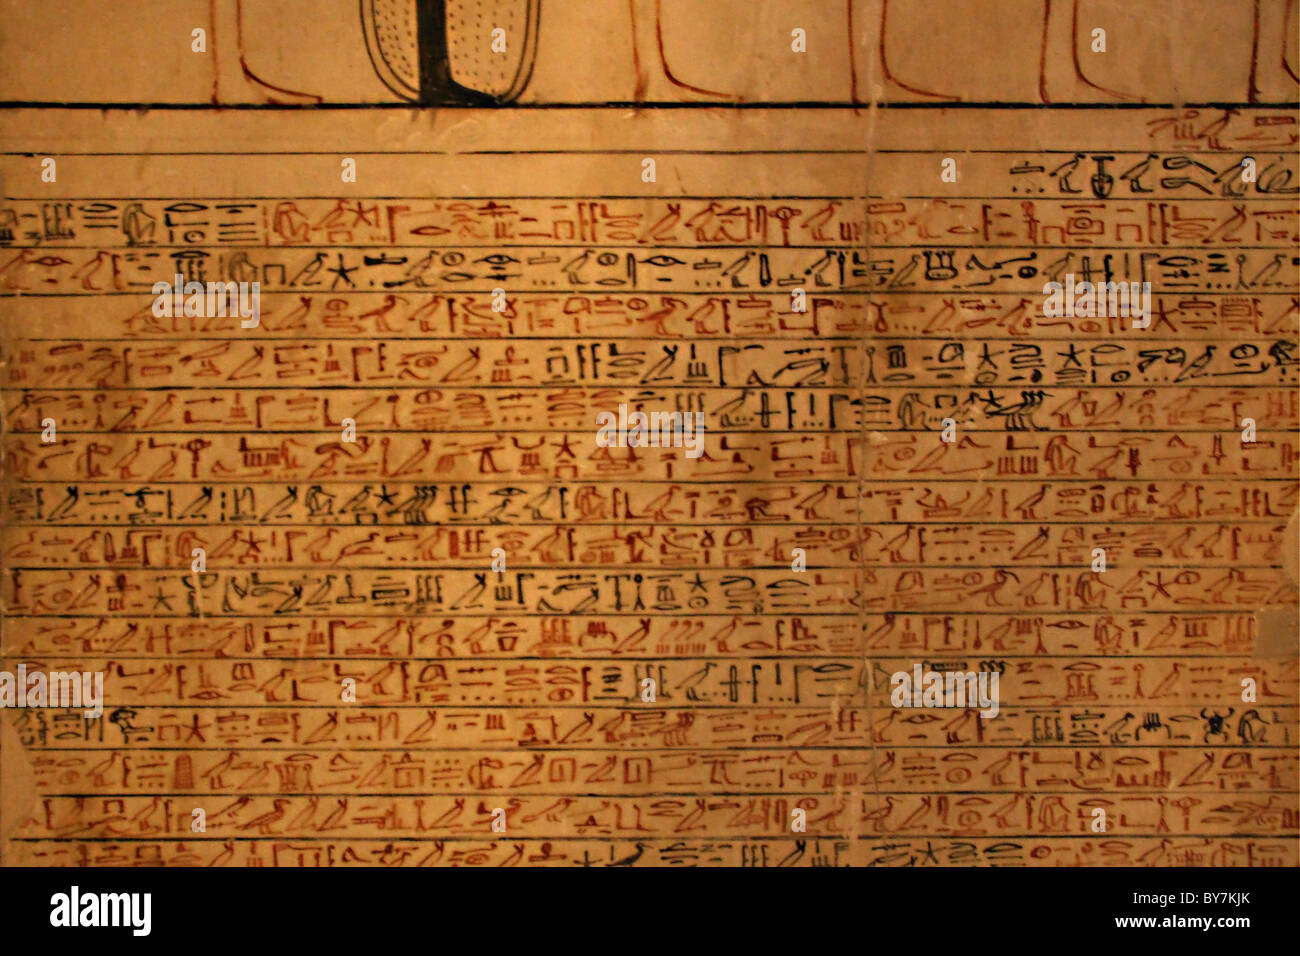 Walls inside the tomb of Tutmoses III in the valley of the kings, Luxor Egypt. Stock Photo